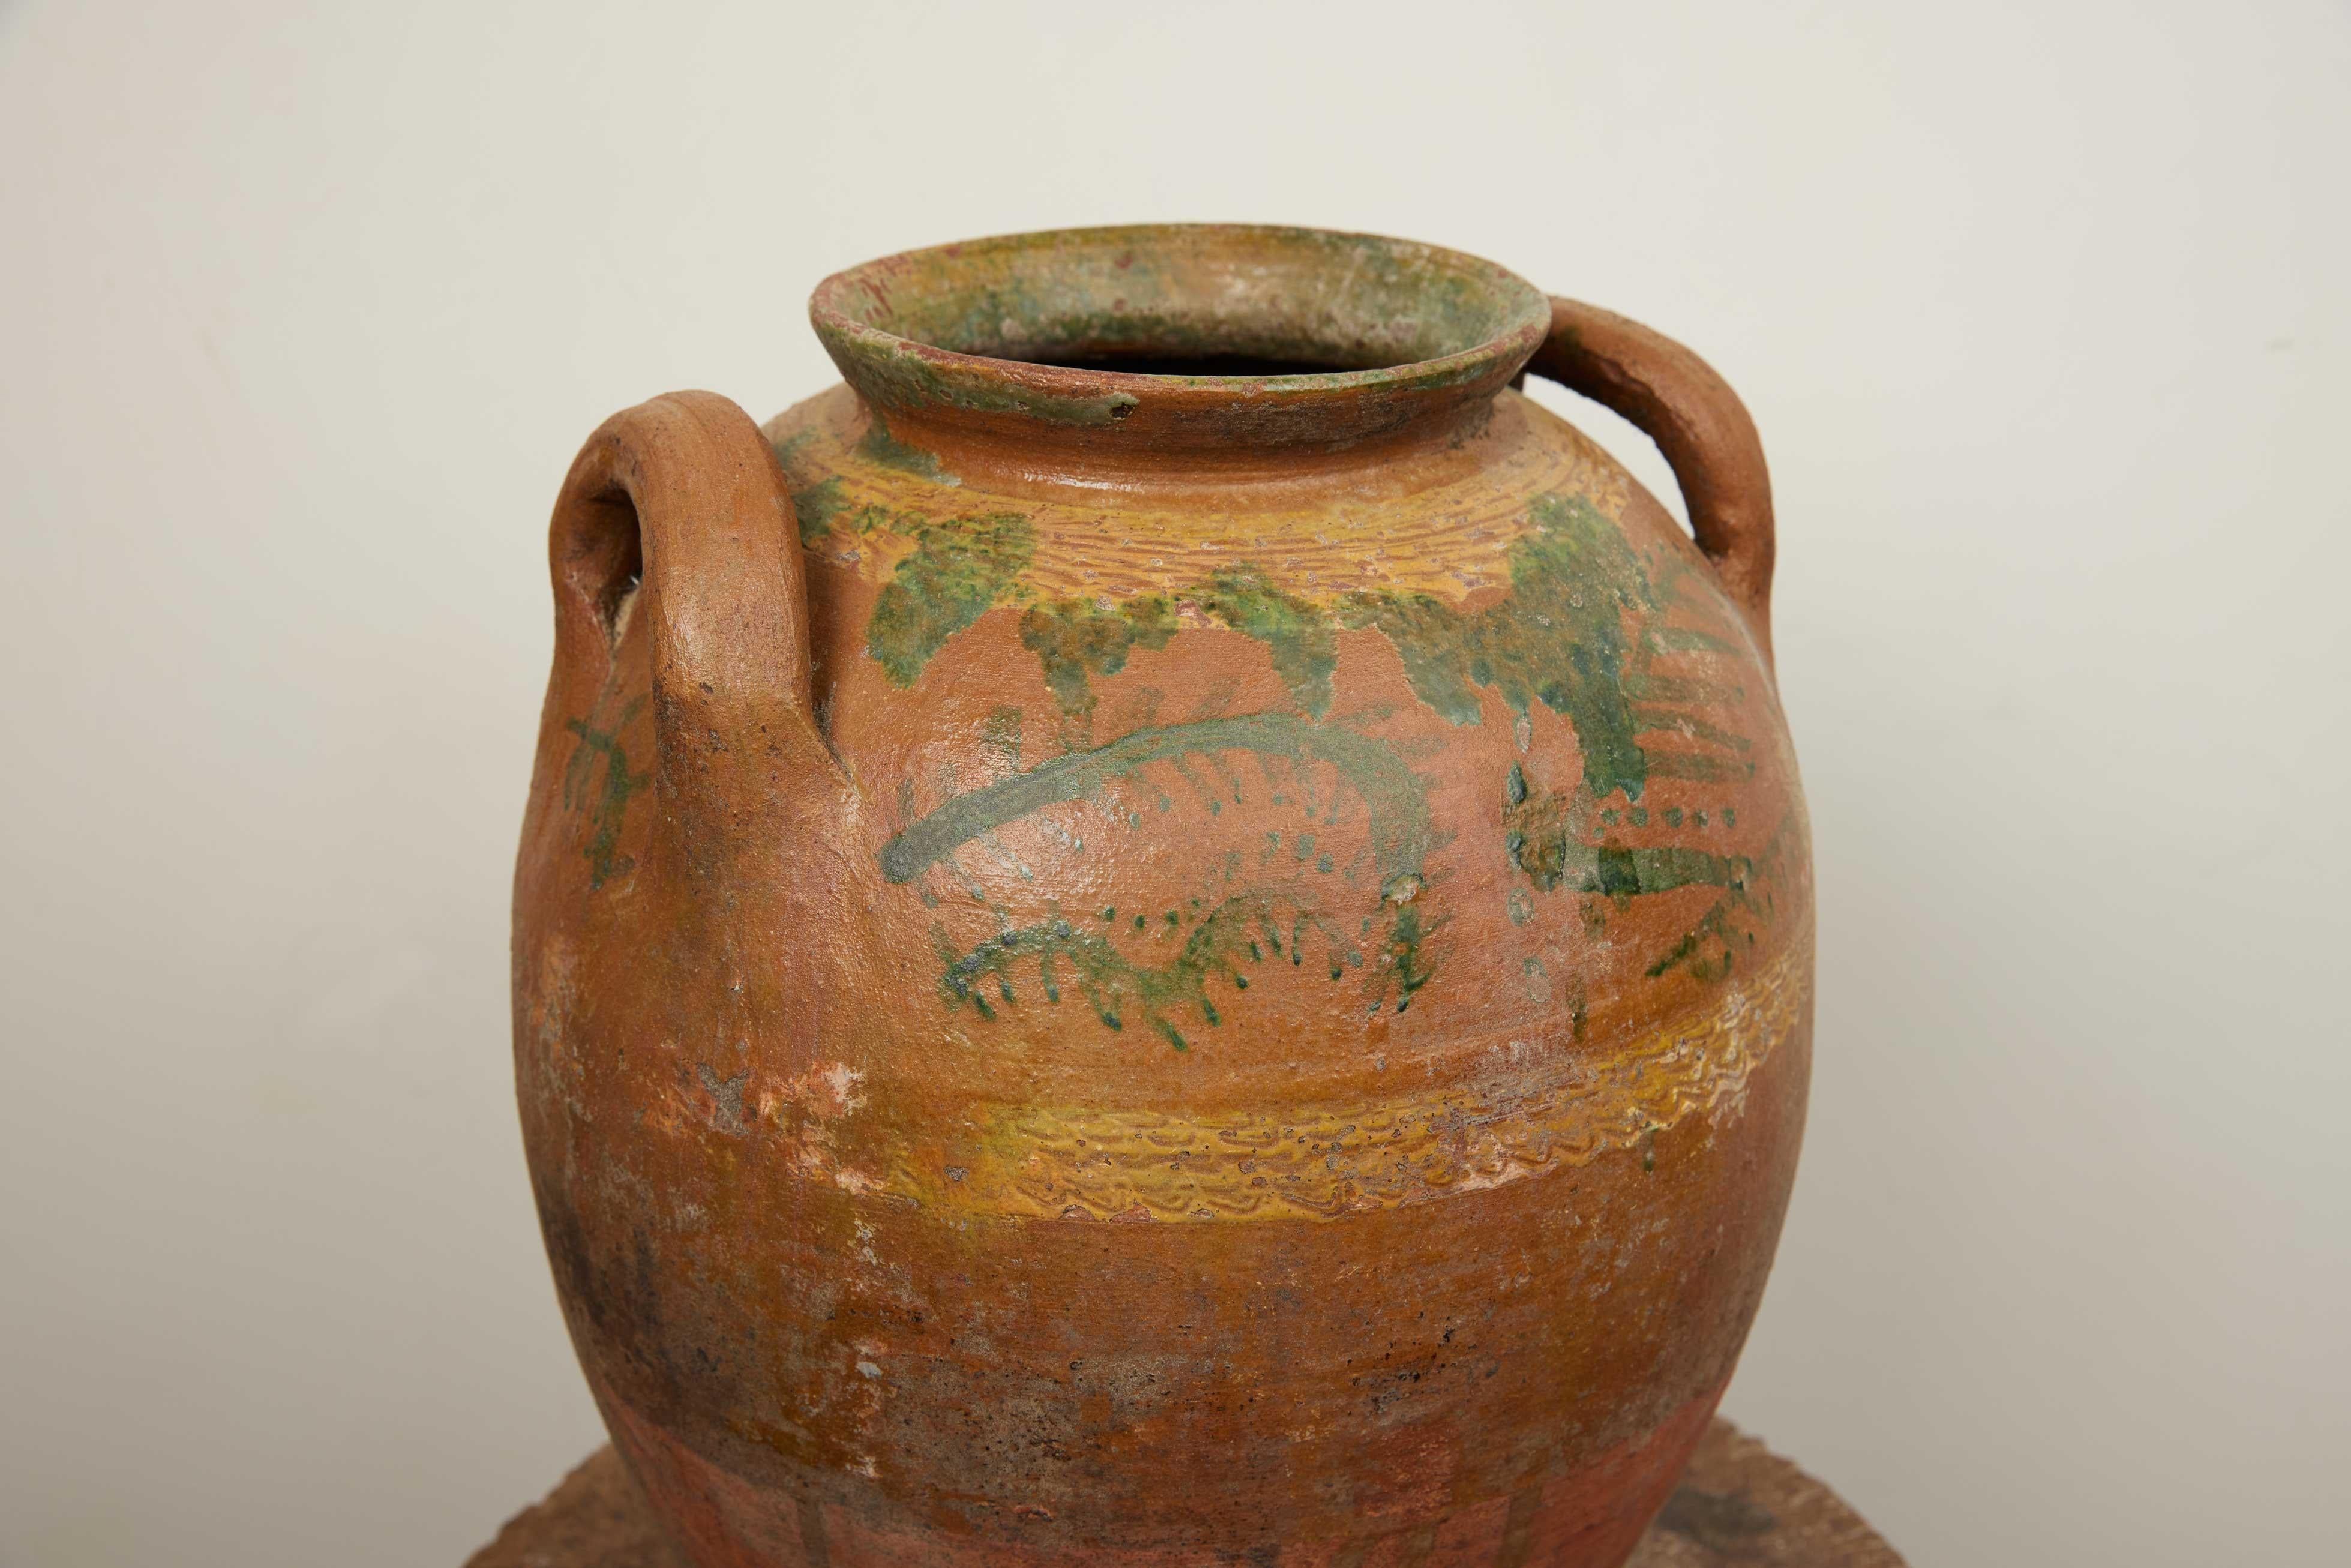 Earthenware Hungarian Pottery, circa 1900s

This exquisite piece of early 20th century, this antique Hungarian pottery stands as a testament to the rich cultural heritage and skilled craftsmanship of the era. Measuring 14 inches in height and 10